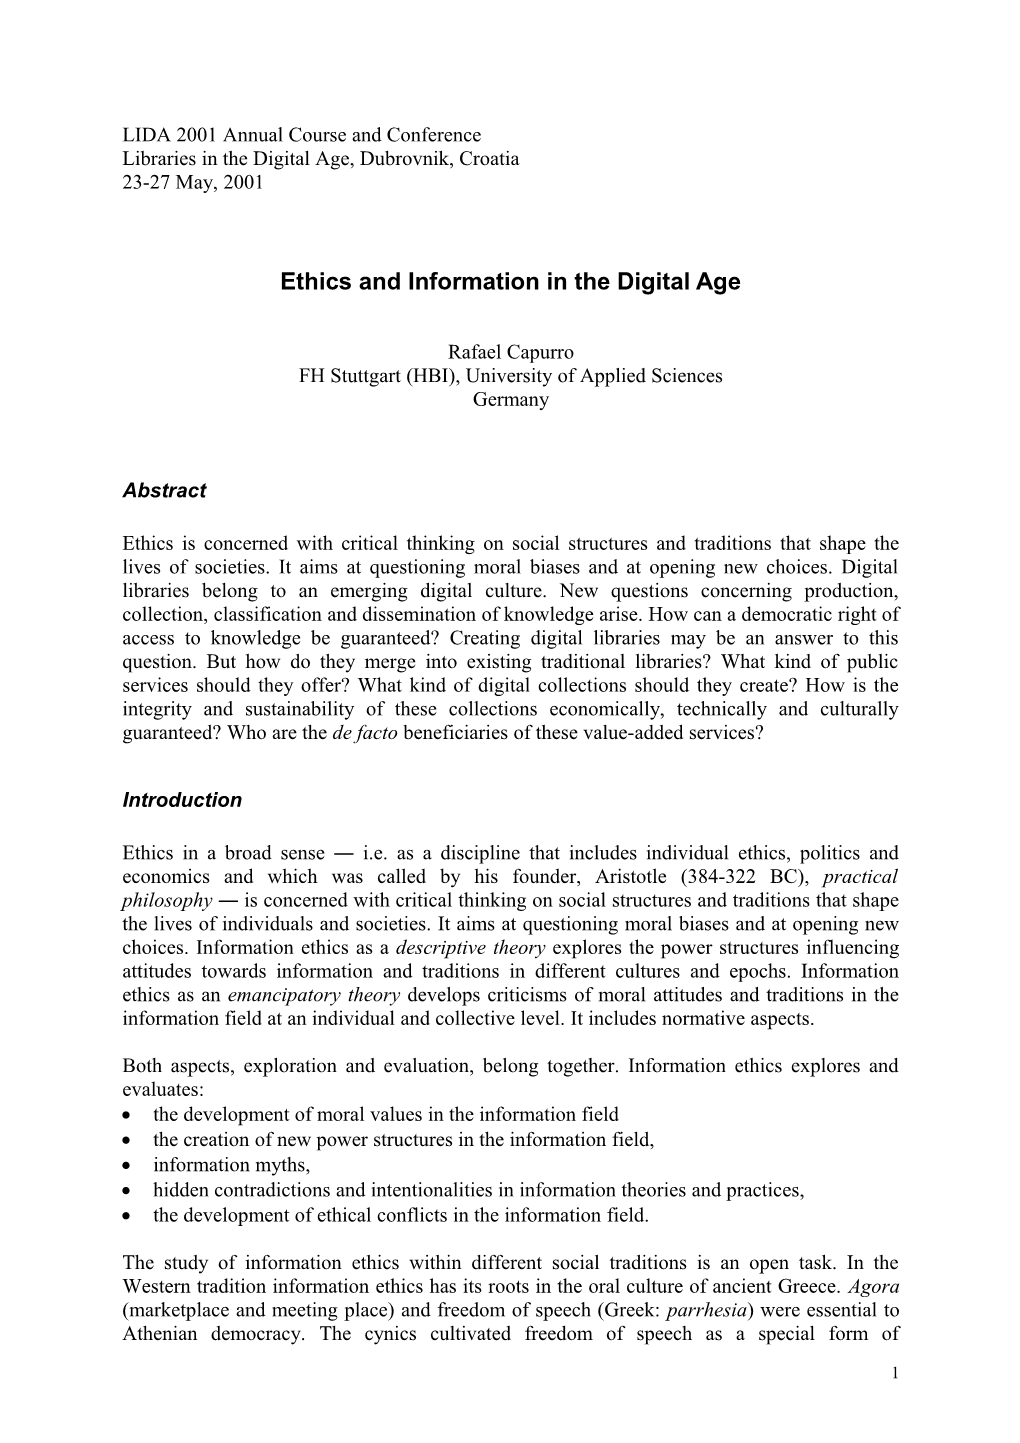 Ethics and Information in the Digital Age